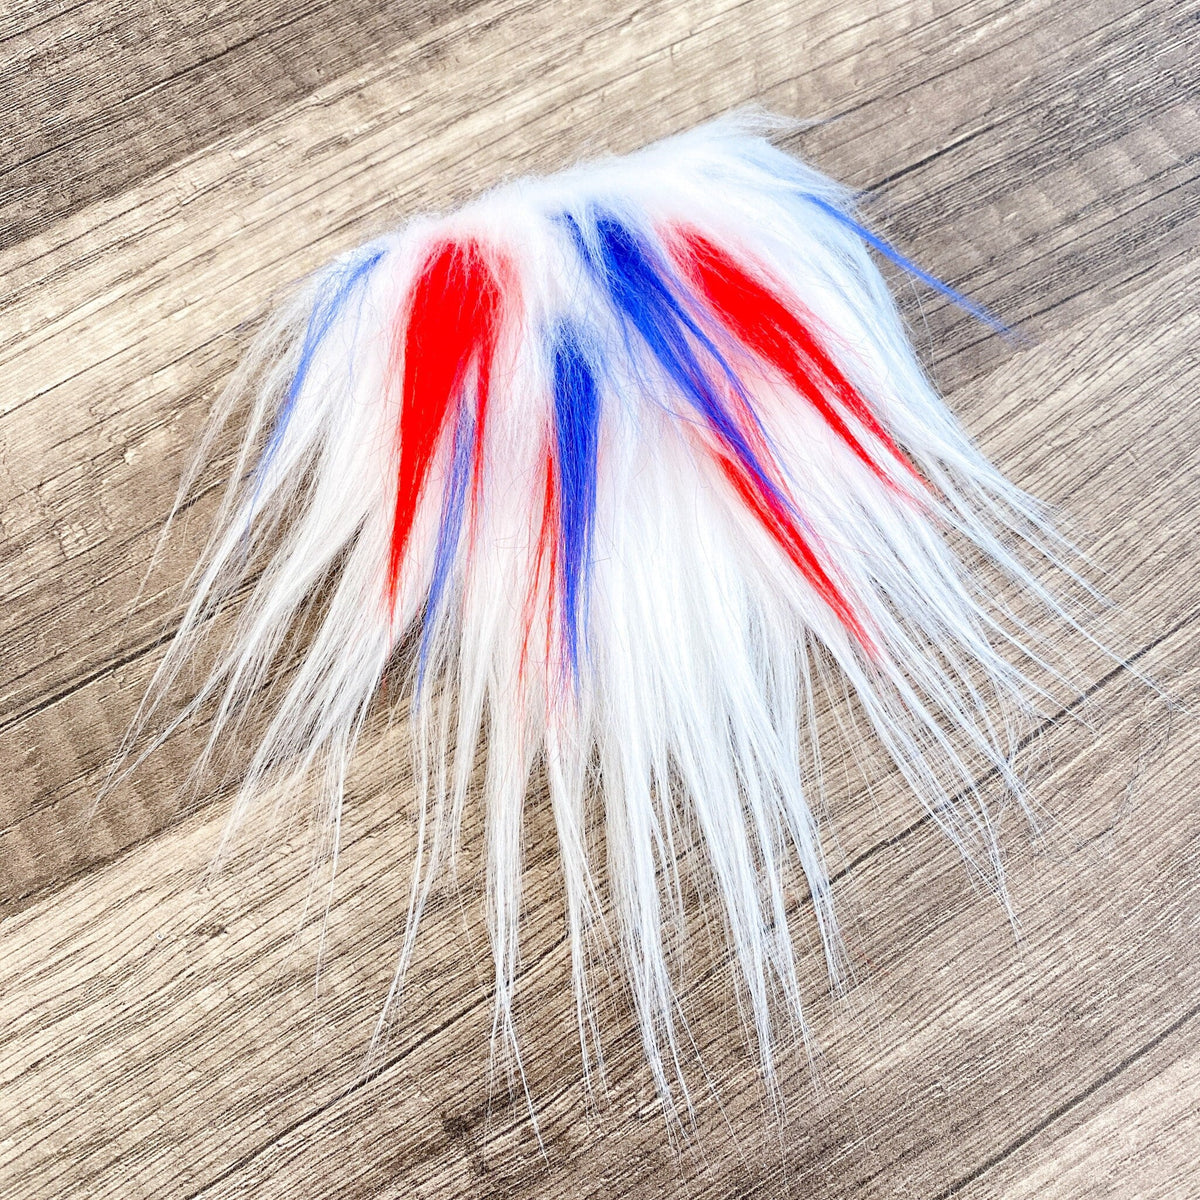 Two Piece Layered Gnome Beard - Patriotic Spike Over Wavy White